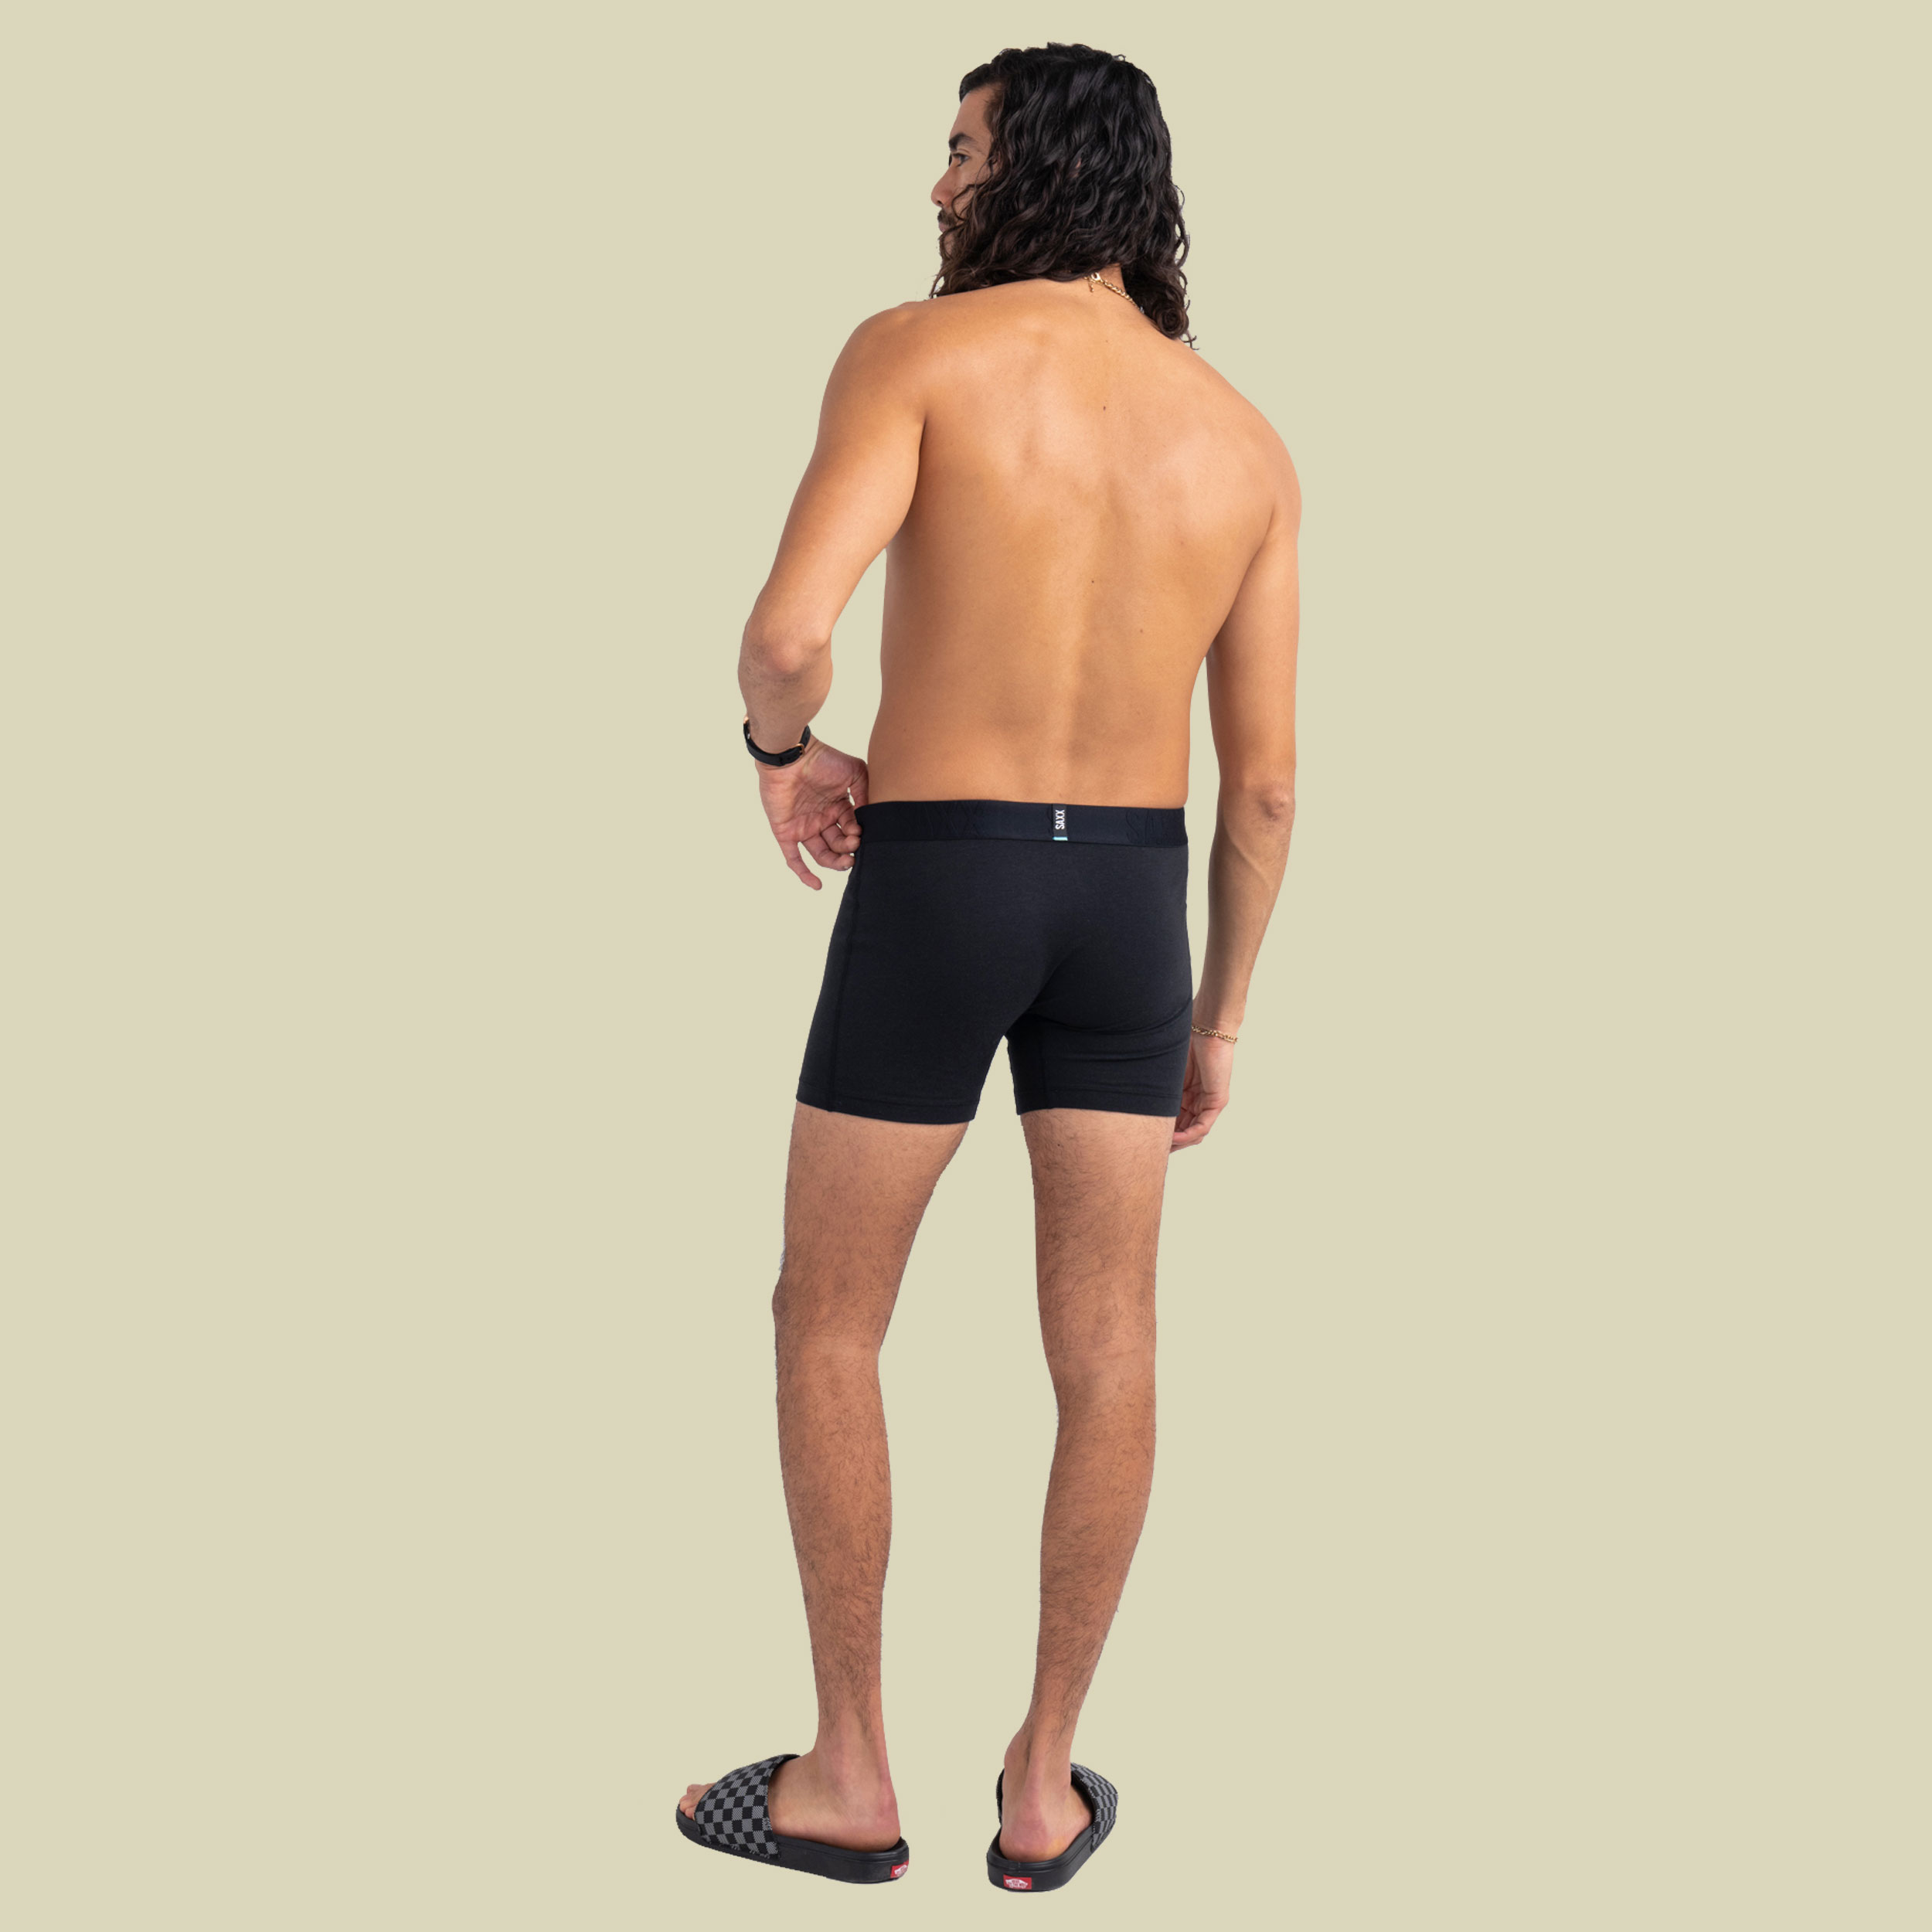 Droptemp Cooling Cotton Boxer Brief Fly 2pk XL mehrfarbig  - back & forth/black